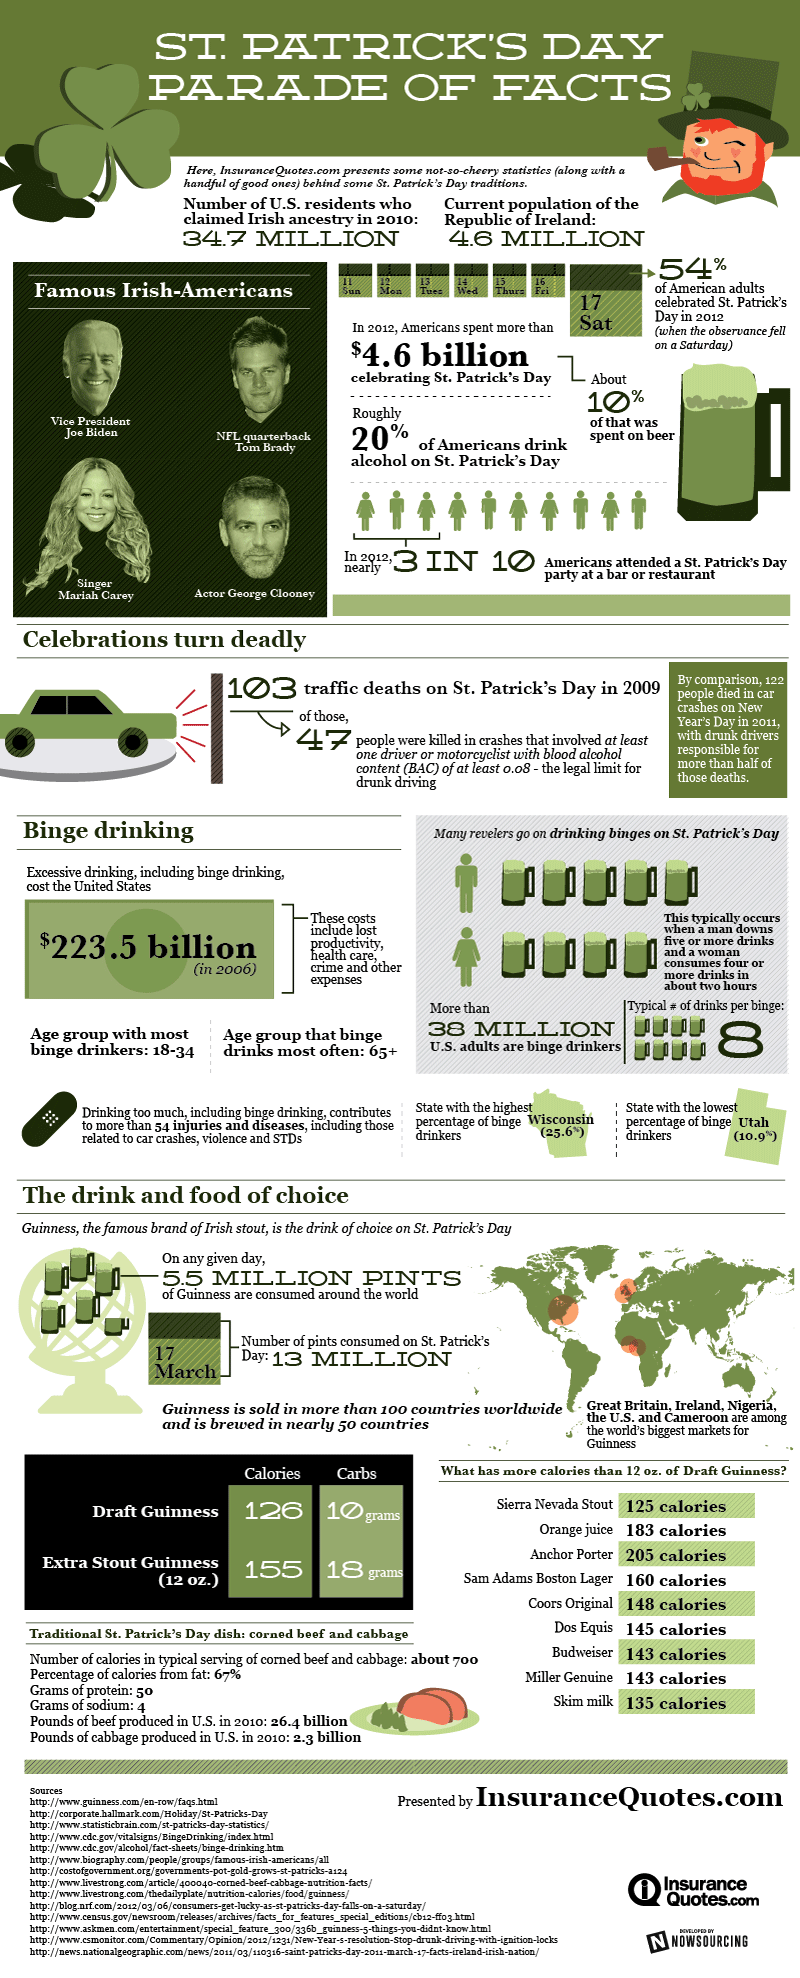 St. Patrick’s Day Parade of Facts